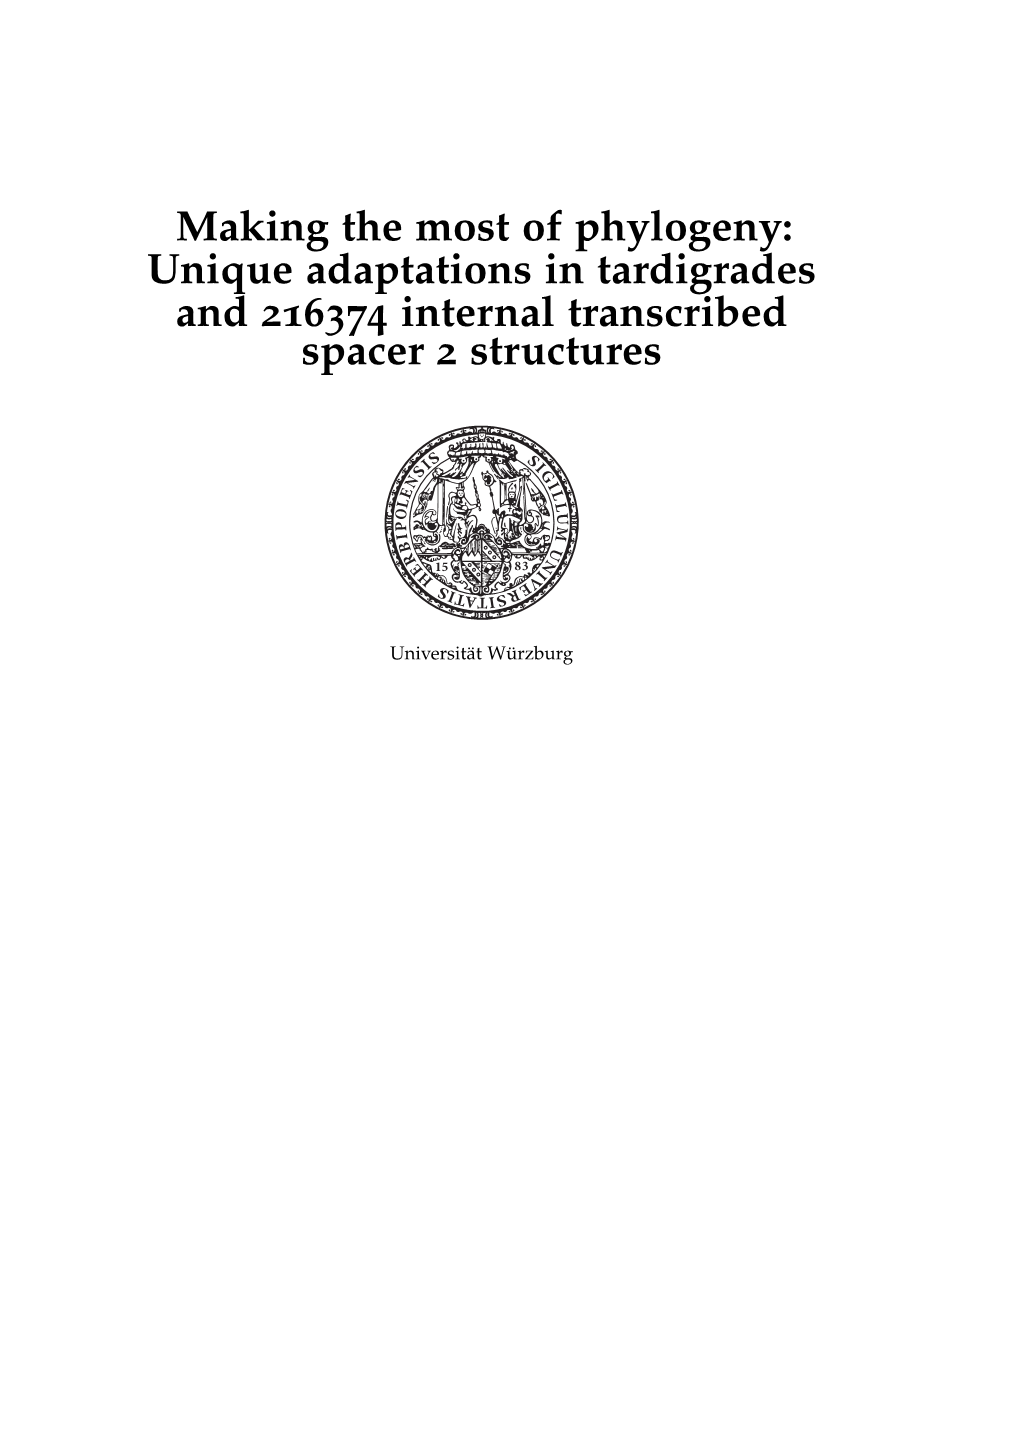 Unique Adaptations in Tardigrades and 216374 Internal Transcribed Spacer 2 Structures